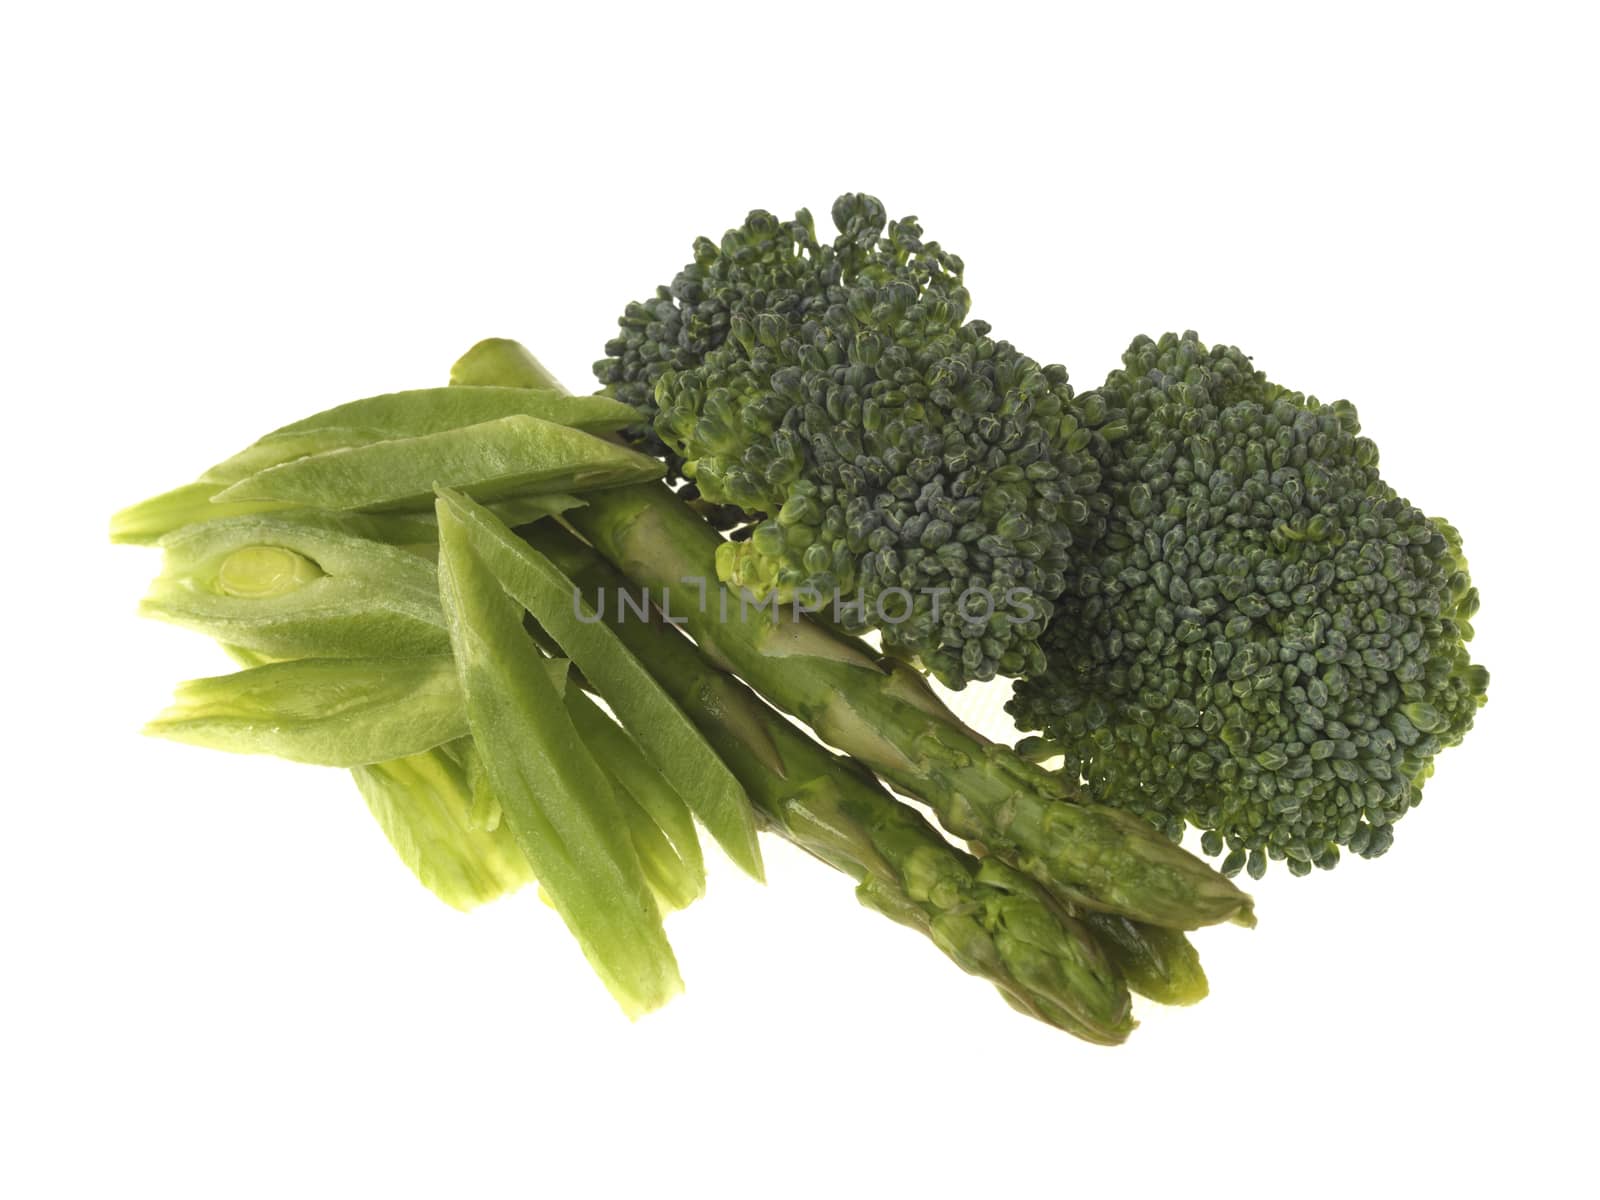 Fresh Raw Uncooked Vegetables Broccoli Asparagus and Runner Beans Isolated White Background